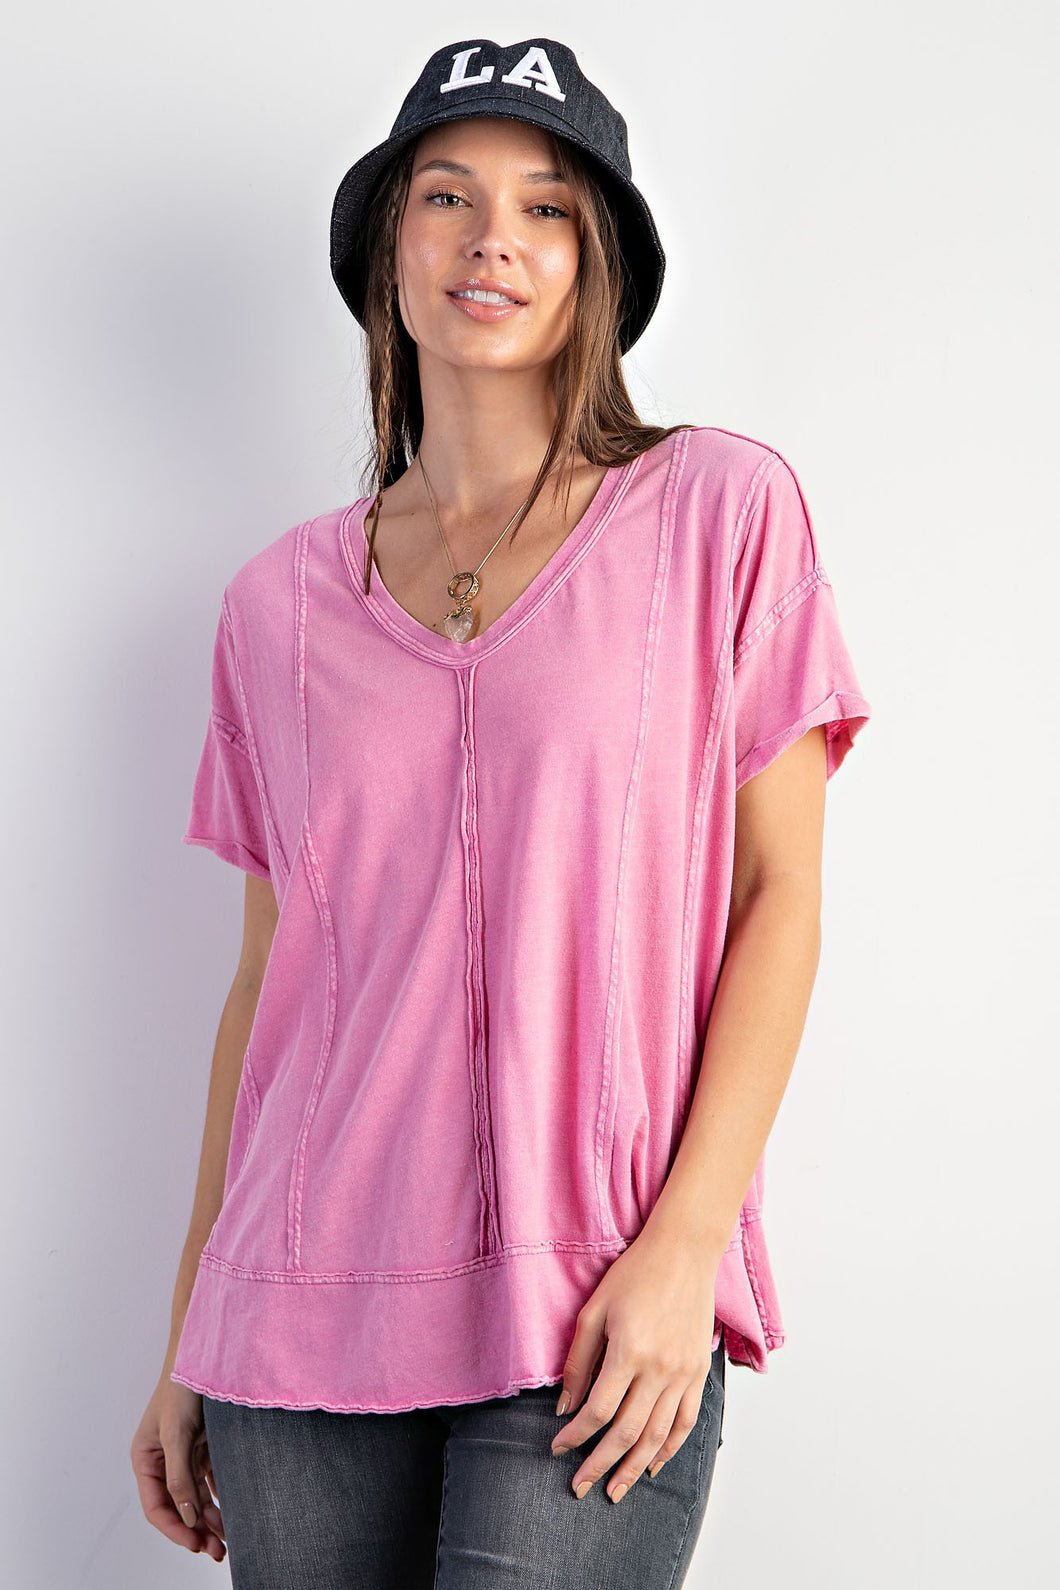 Easel Solid Color Cotton Blend Knit Top in Pink Shirts & Tops Easel   